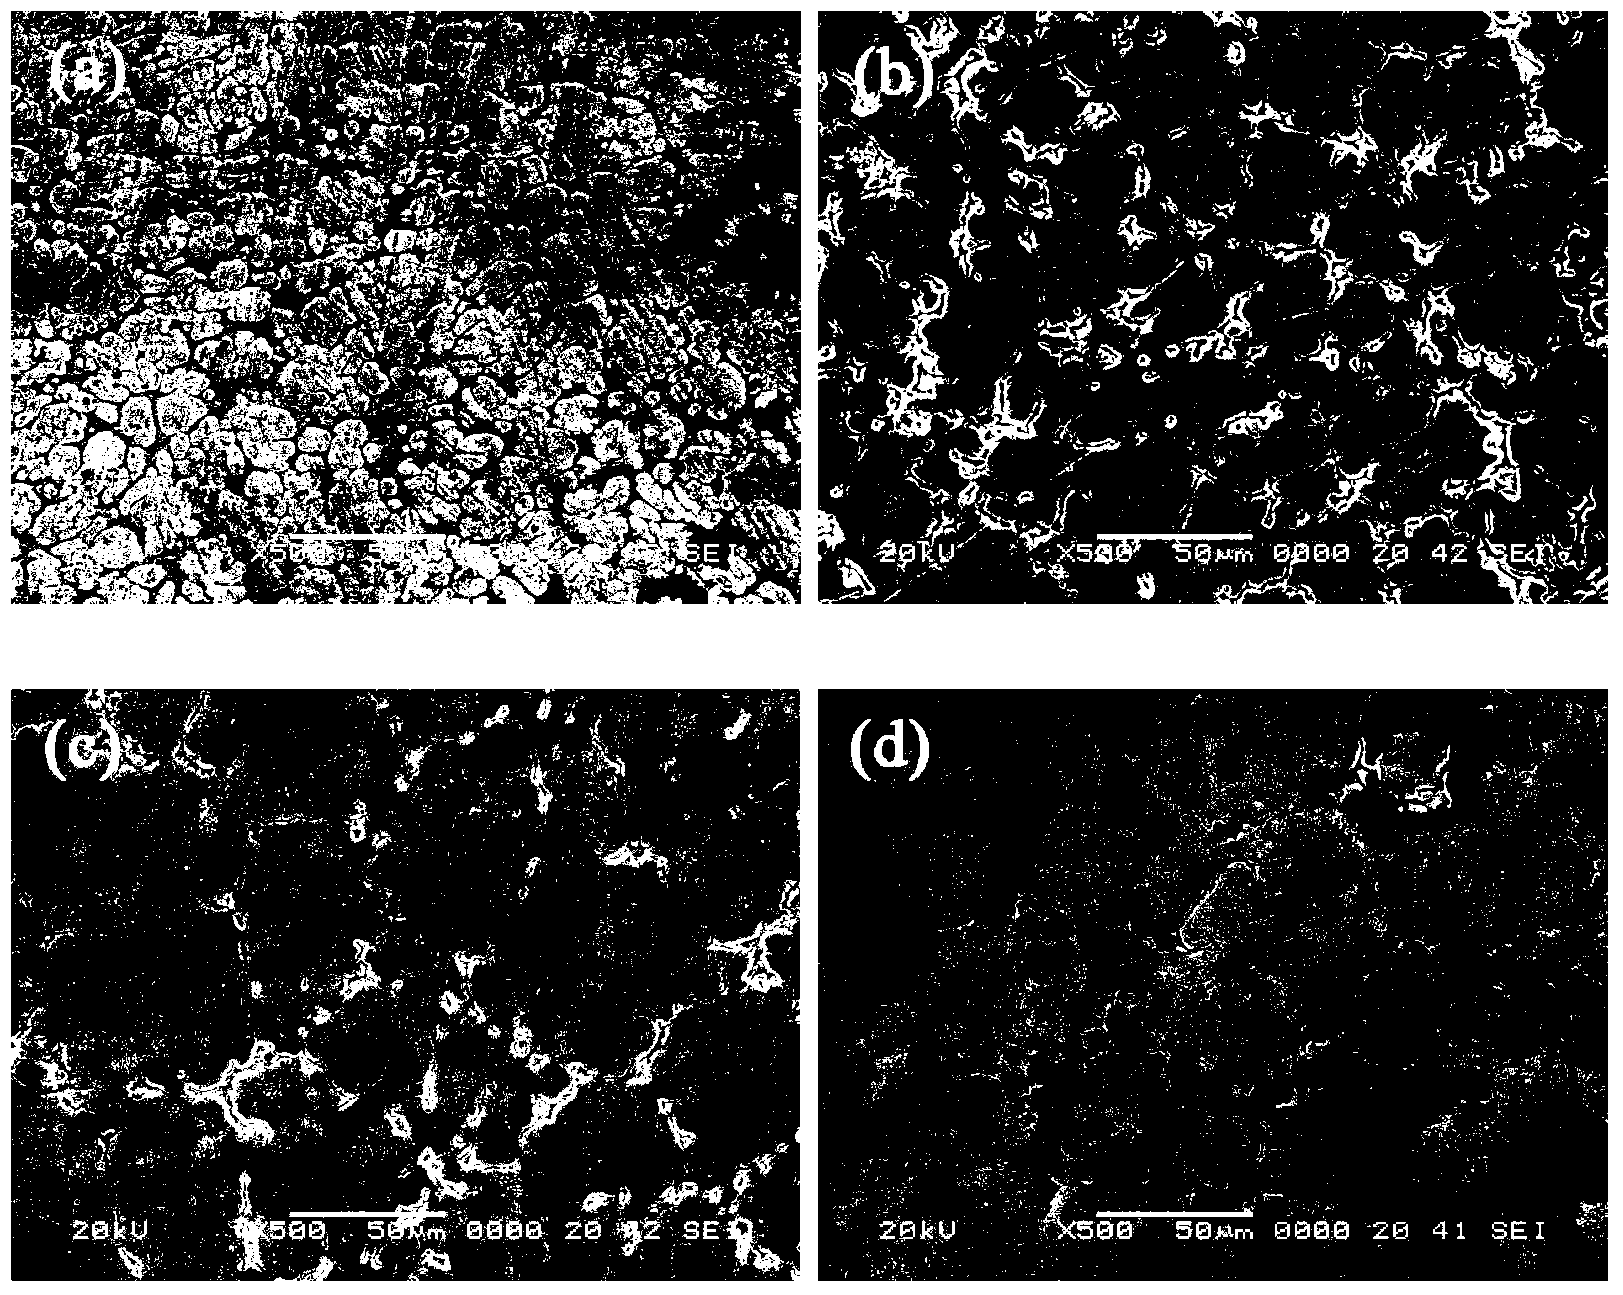 AlxCrFeNiCuVTi high-entropy alloy material and preparation method thereof